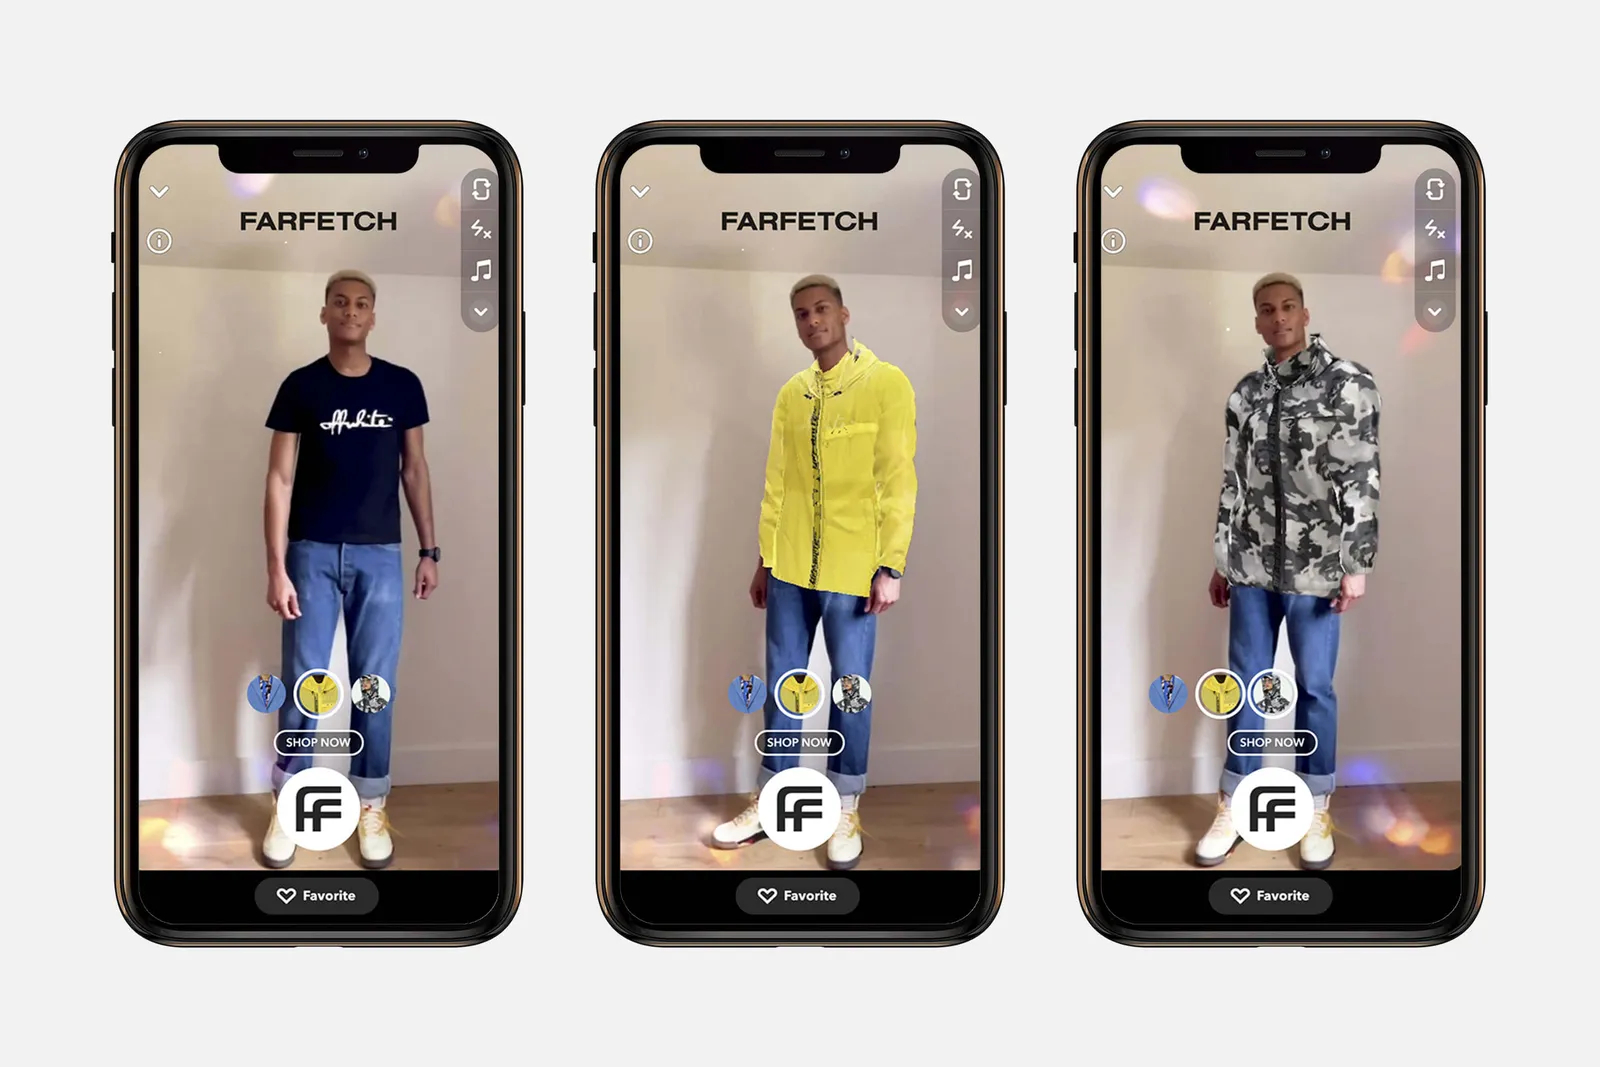 FarFetch Apparel Promotional Advertisement on Snapchat AR Try-On